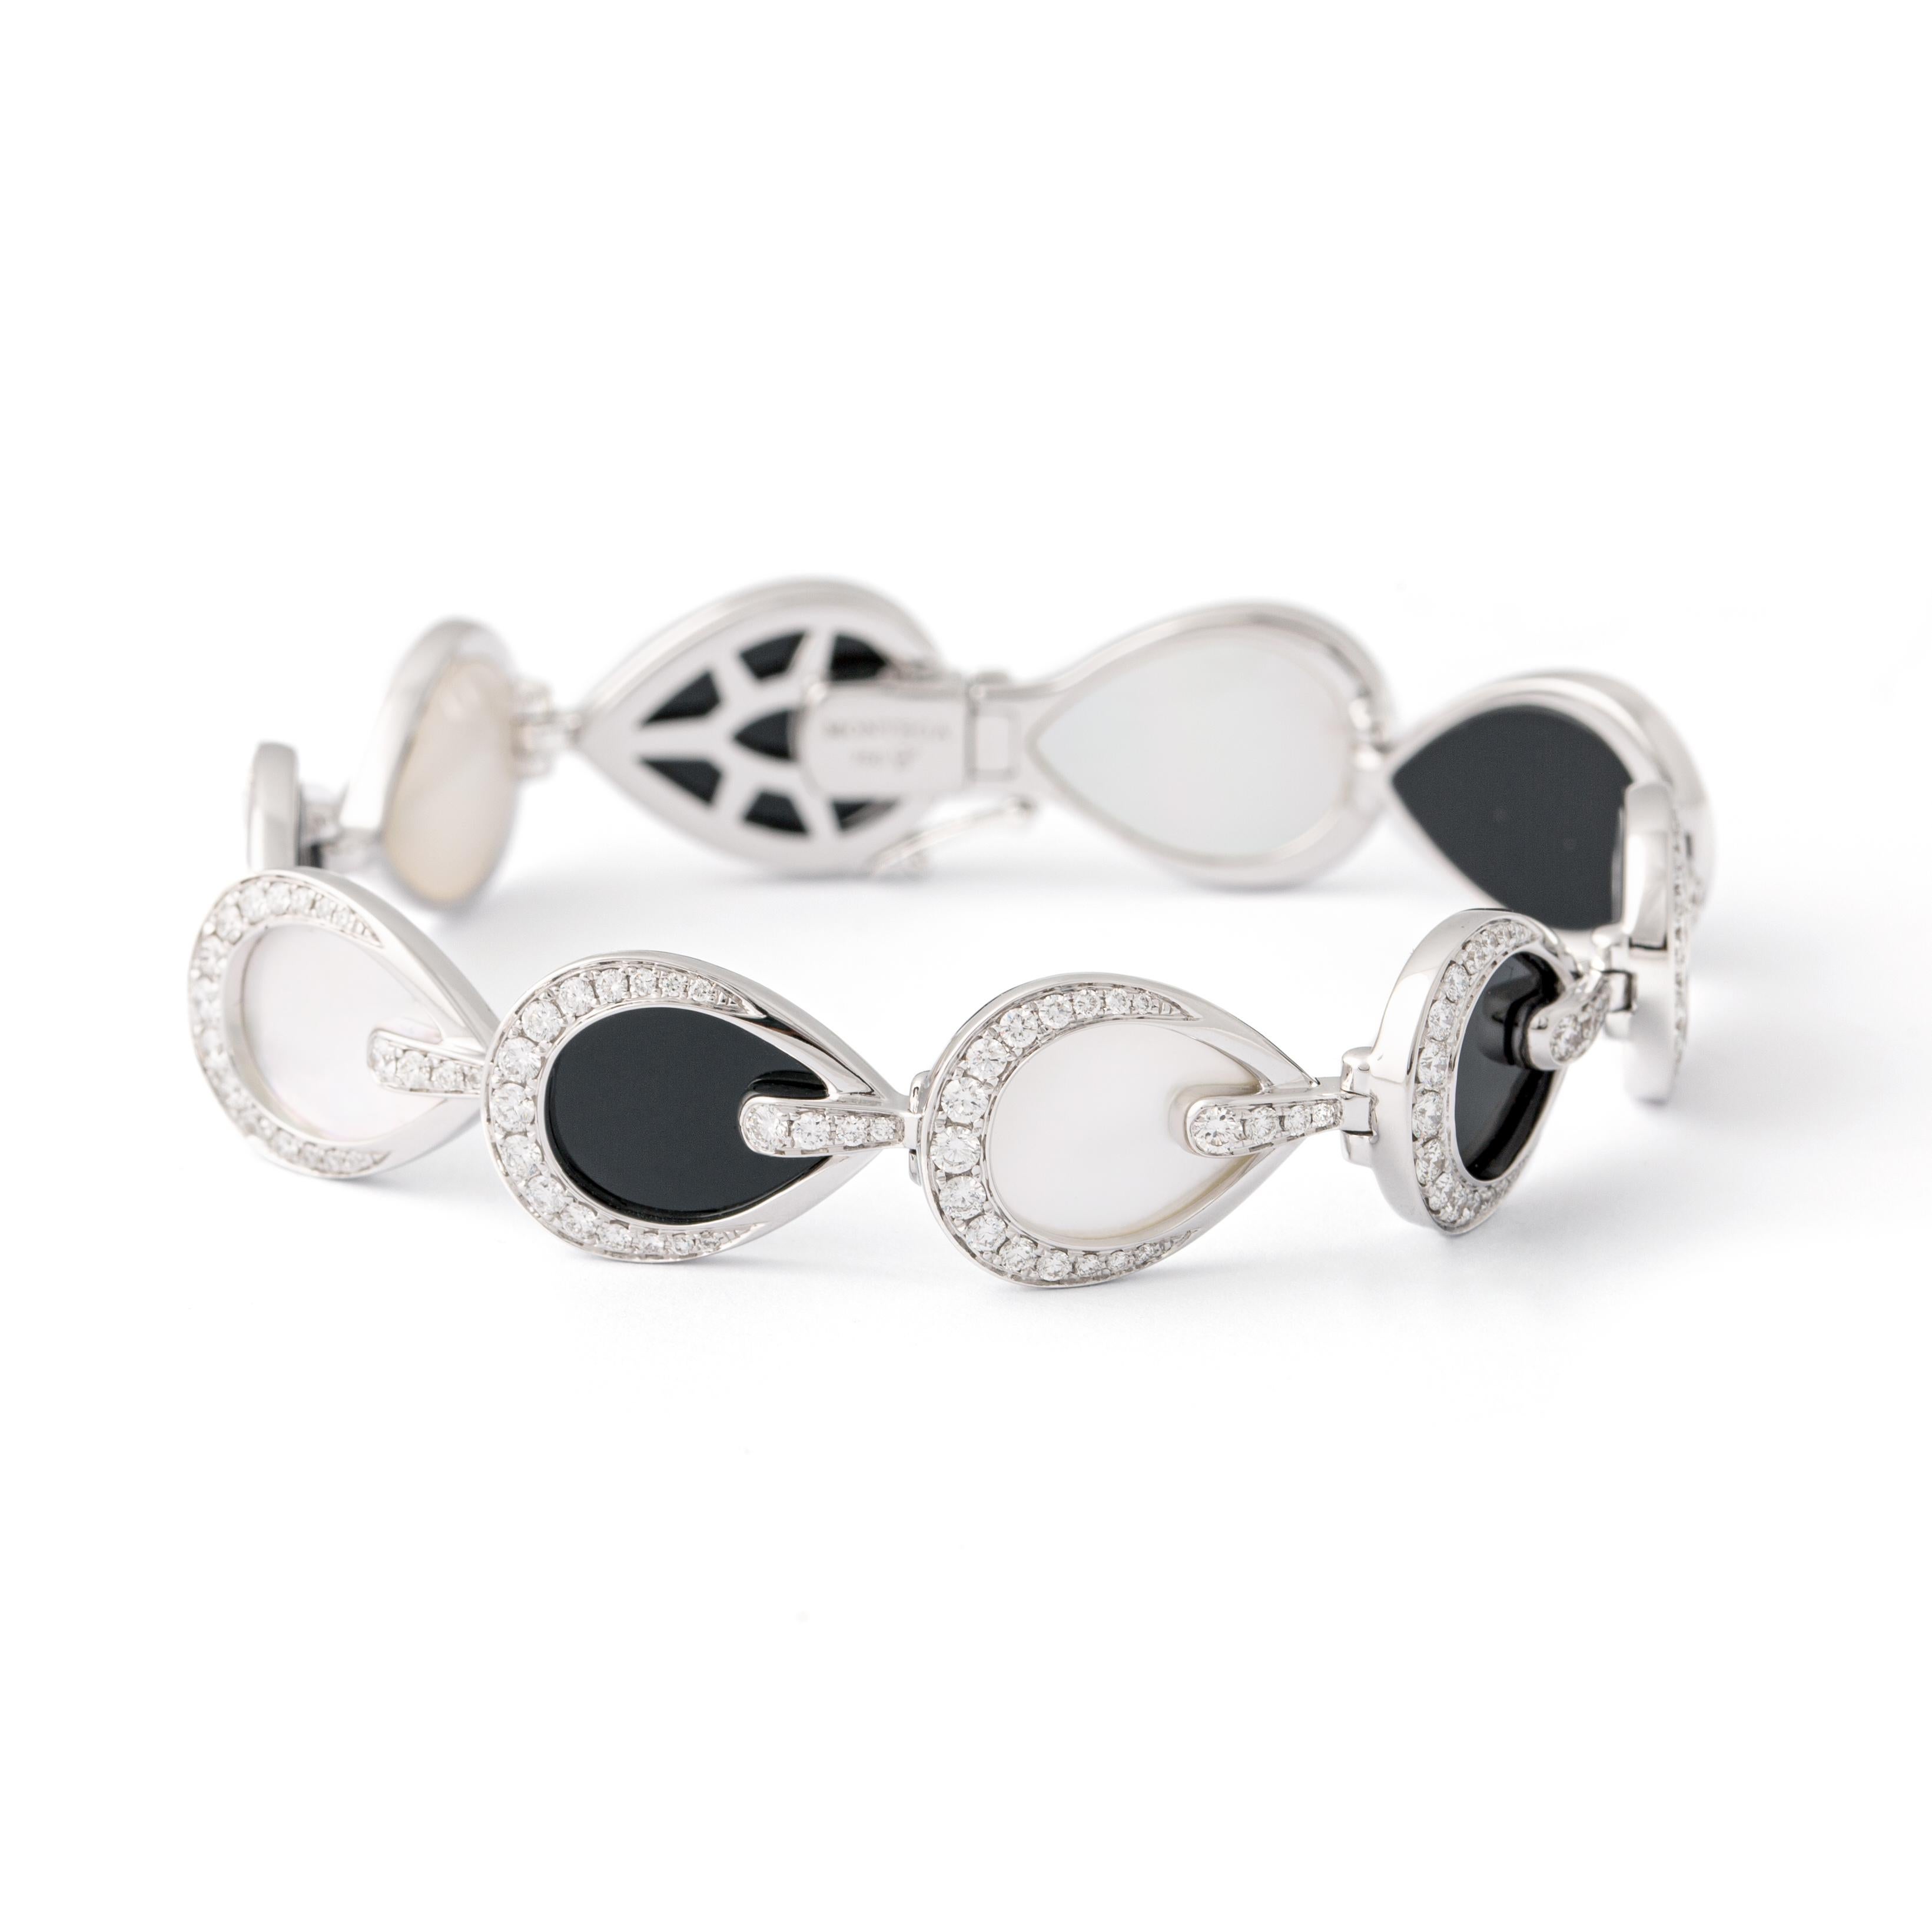 Bracelet in 18kt white gold set with 374 diamonds 4.99 cts, 5 mother-of-pearls 8.51 cts and 5 onyx 8.25 cts.

Length: 17.50 centimeters (6.89 inches).

Total weight: 27.46 grams.

Width: 1.30 centimeters (0.51 inches).